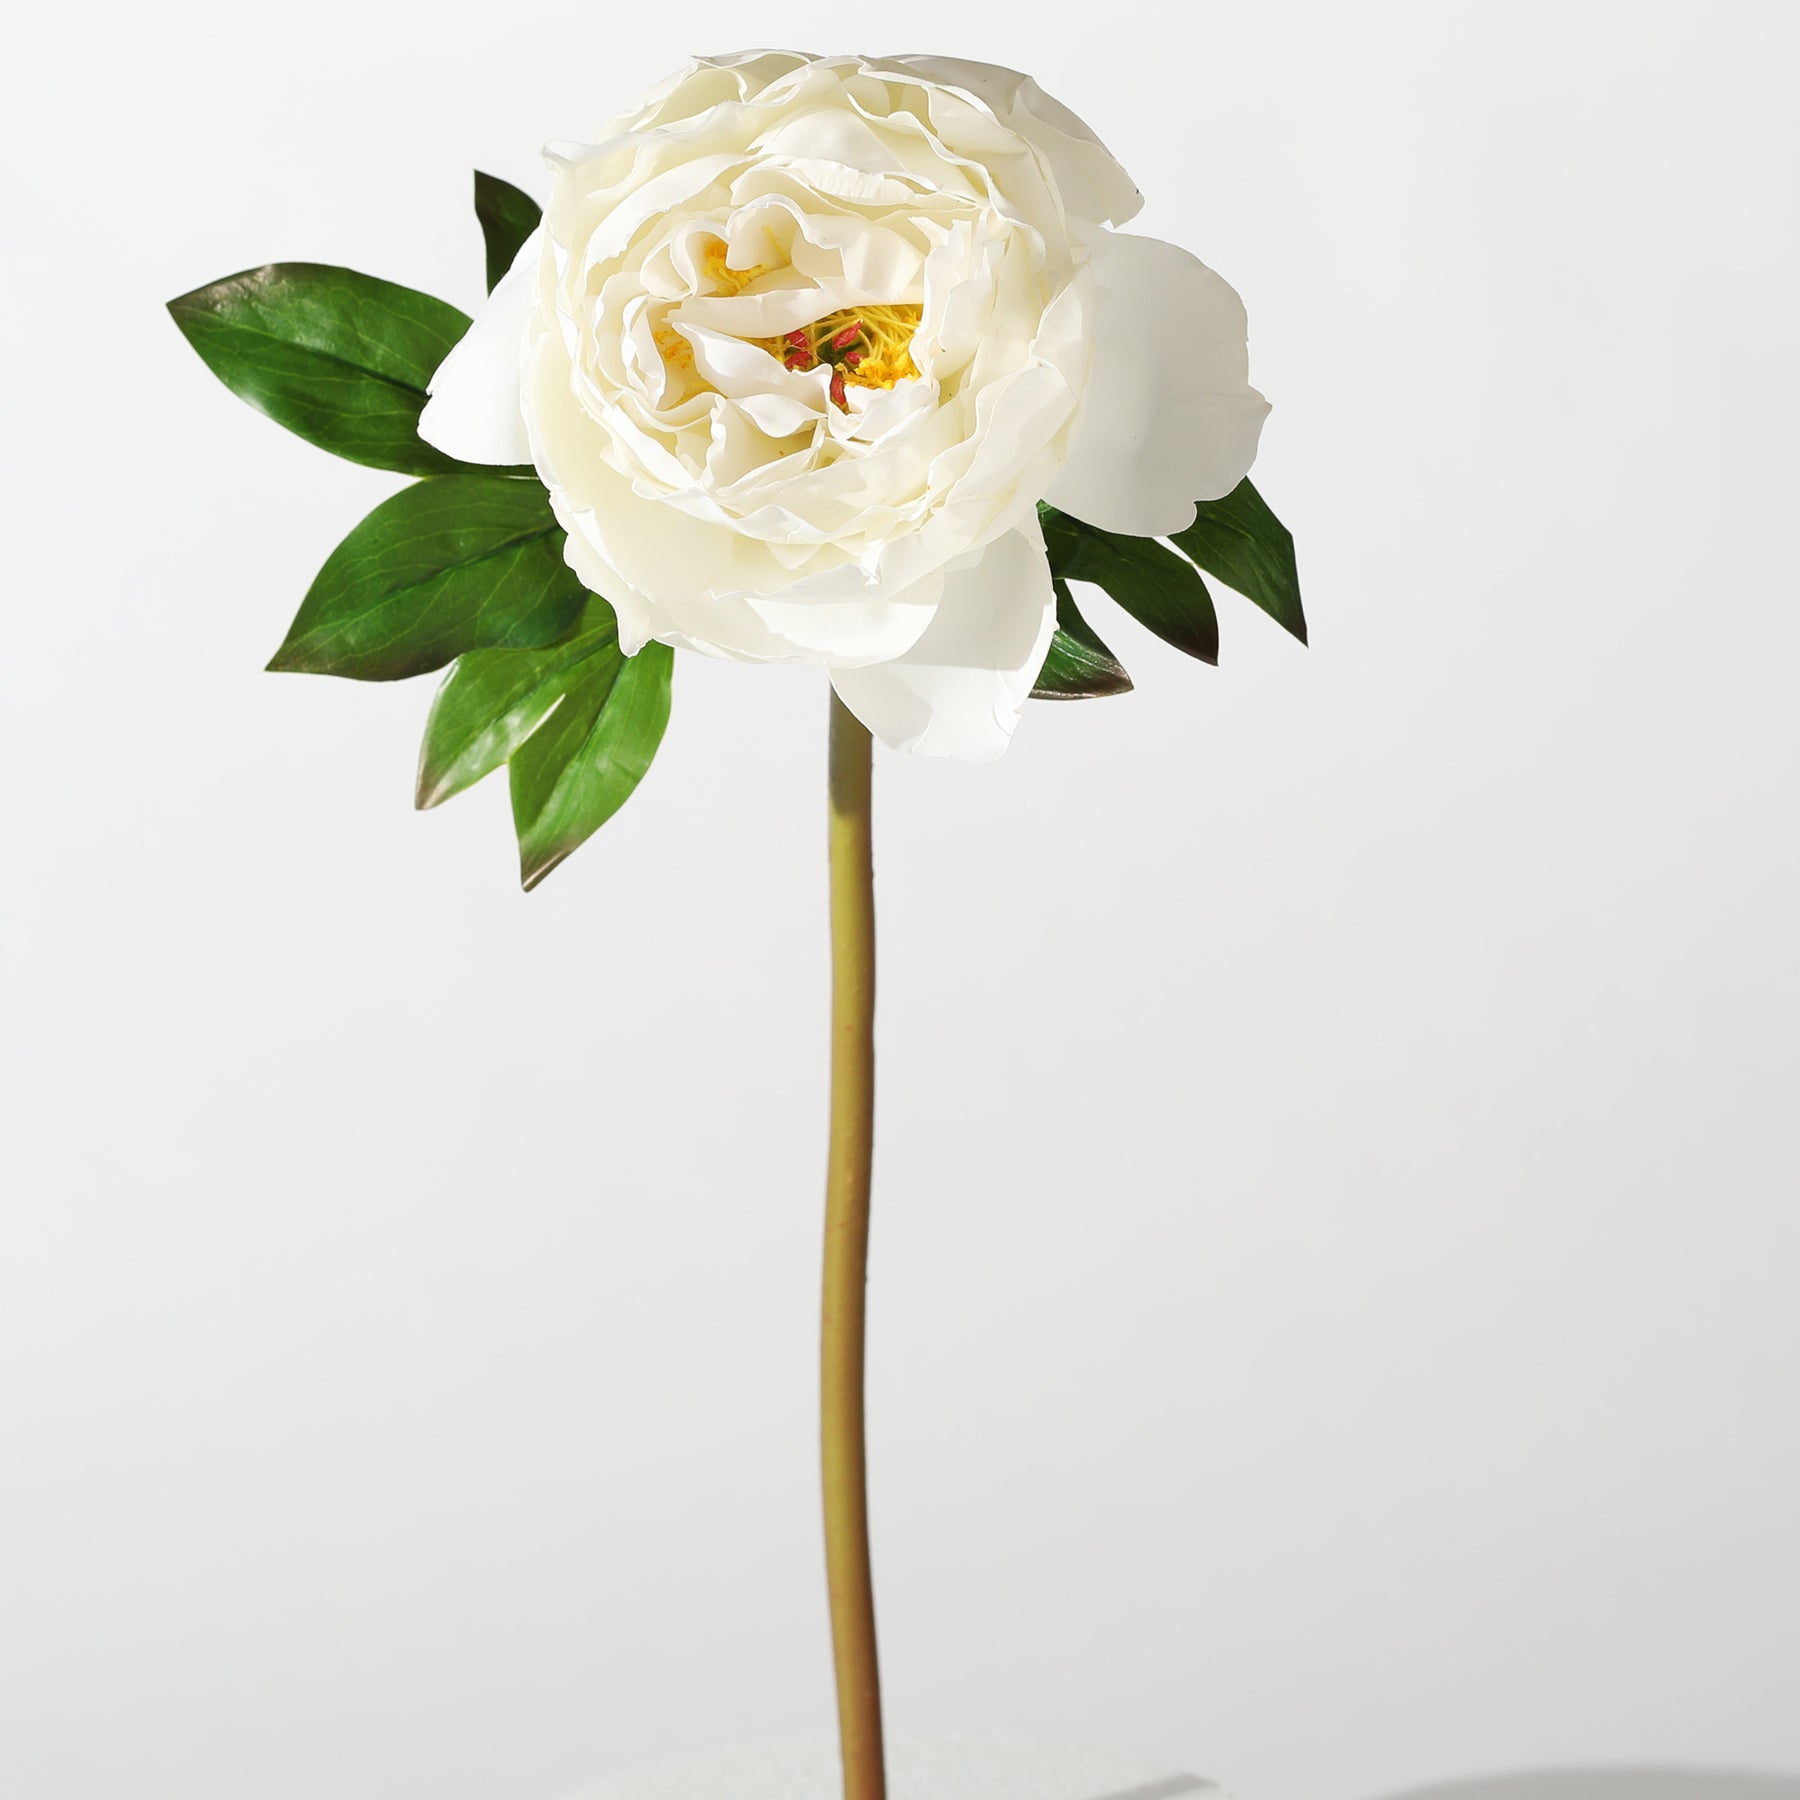 Peonies anyone? Yes… these - White Birch Design Company